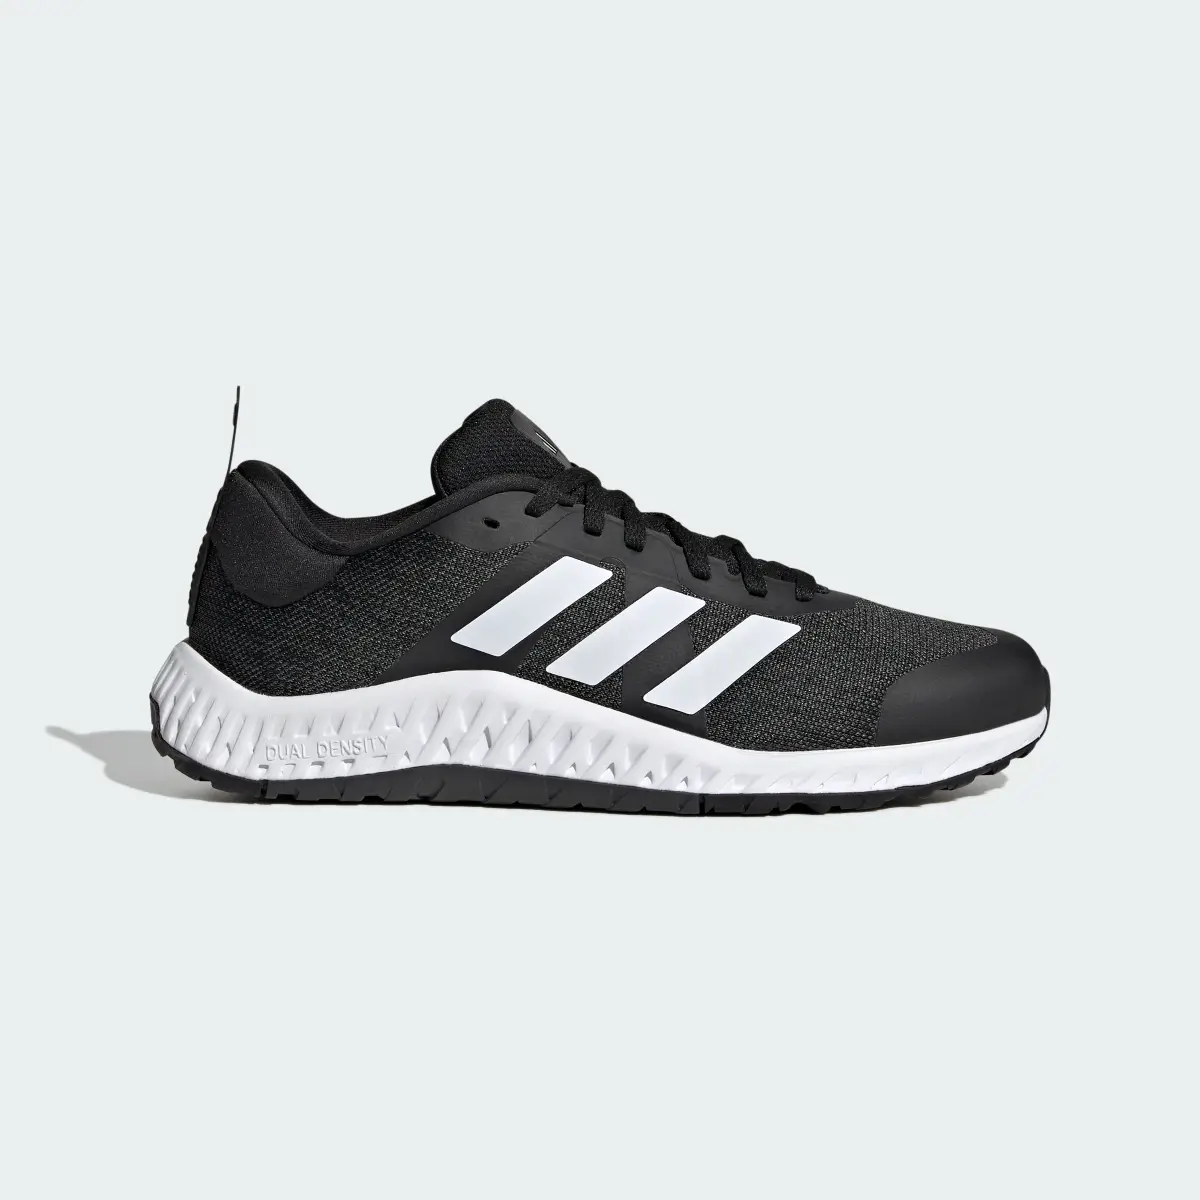 Adidas Everyset Trainer Shoes. 2